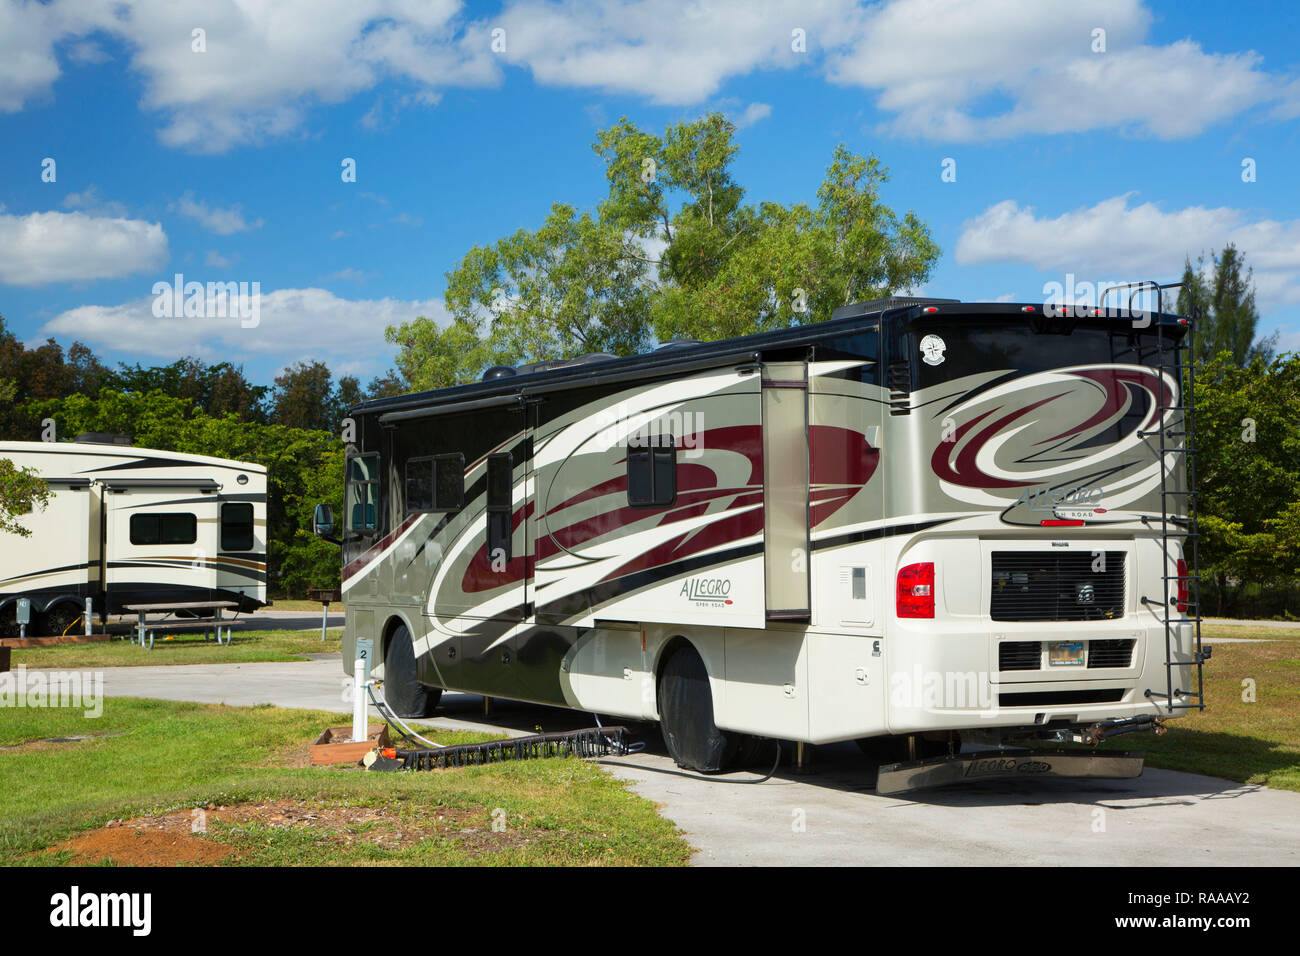 Motorhome in campground, CB Smith Park, Pembroke Pines, Florida Stock Photo